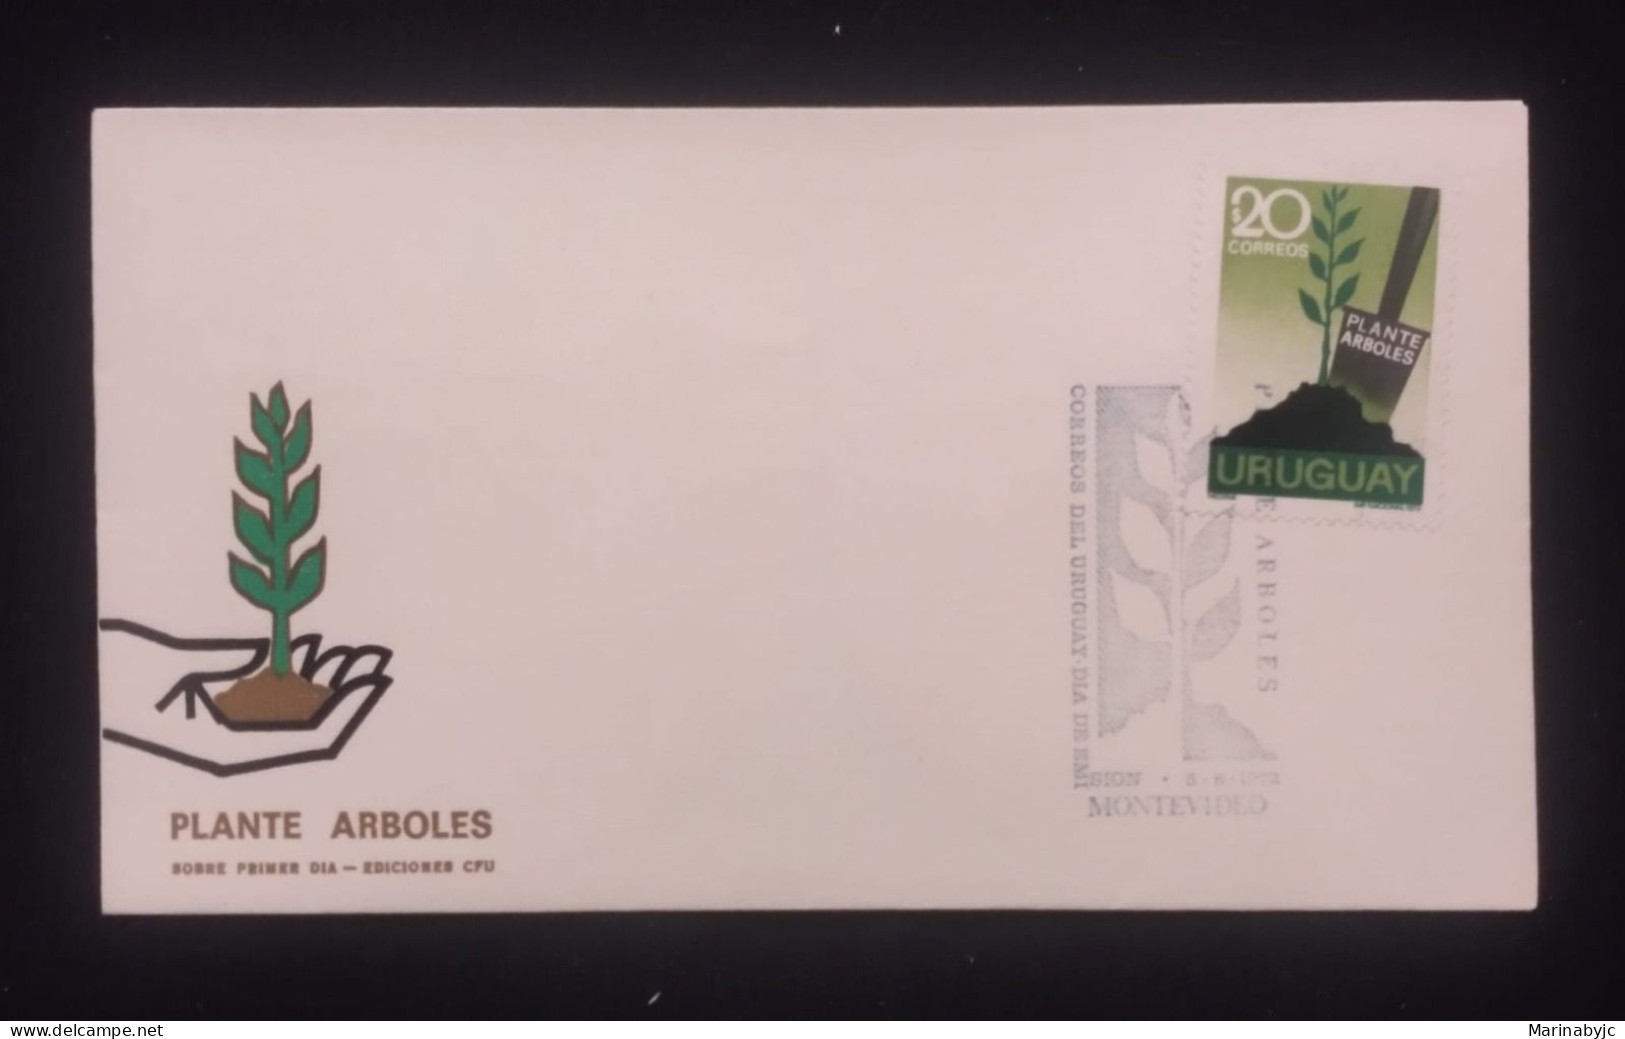 D)1972, URUGUAY, FIRST DAY COVER, ISSUE, NATIONAL REFORESTATION CAMPAIGN, PLAN TREES, FDC - Uruguay